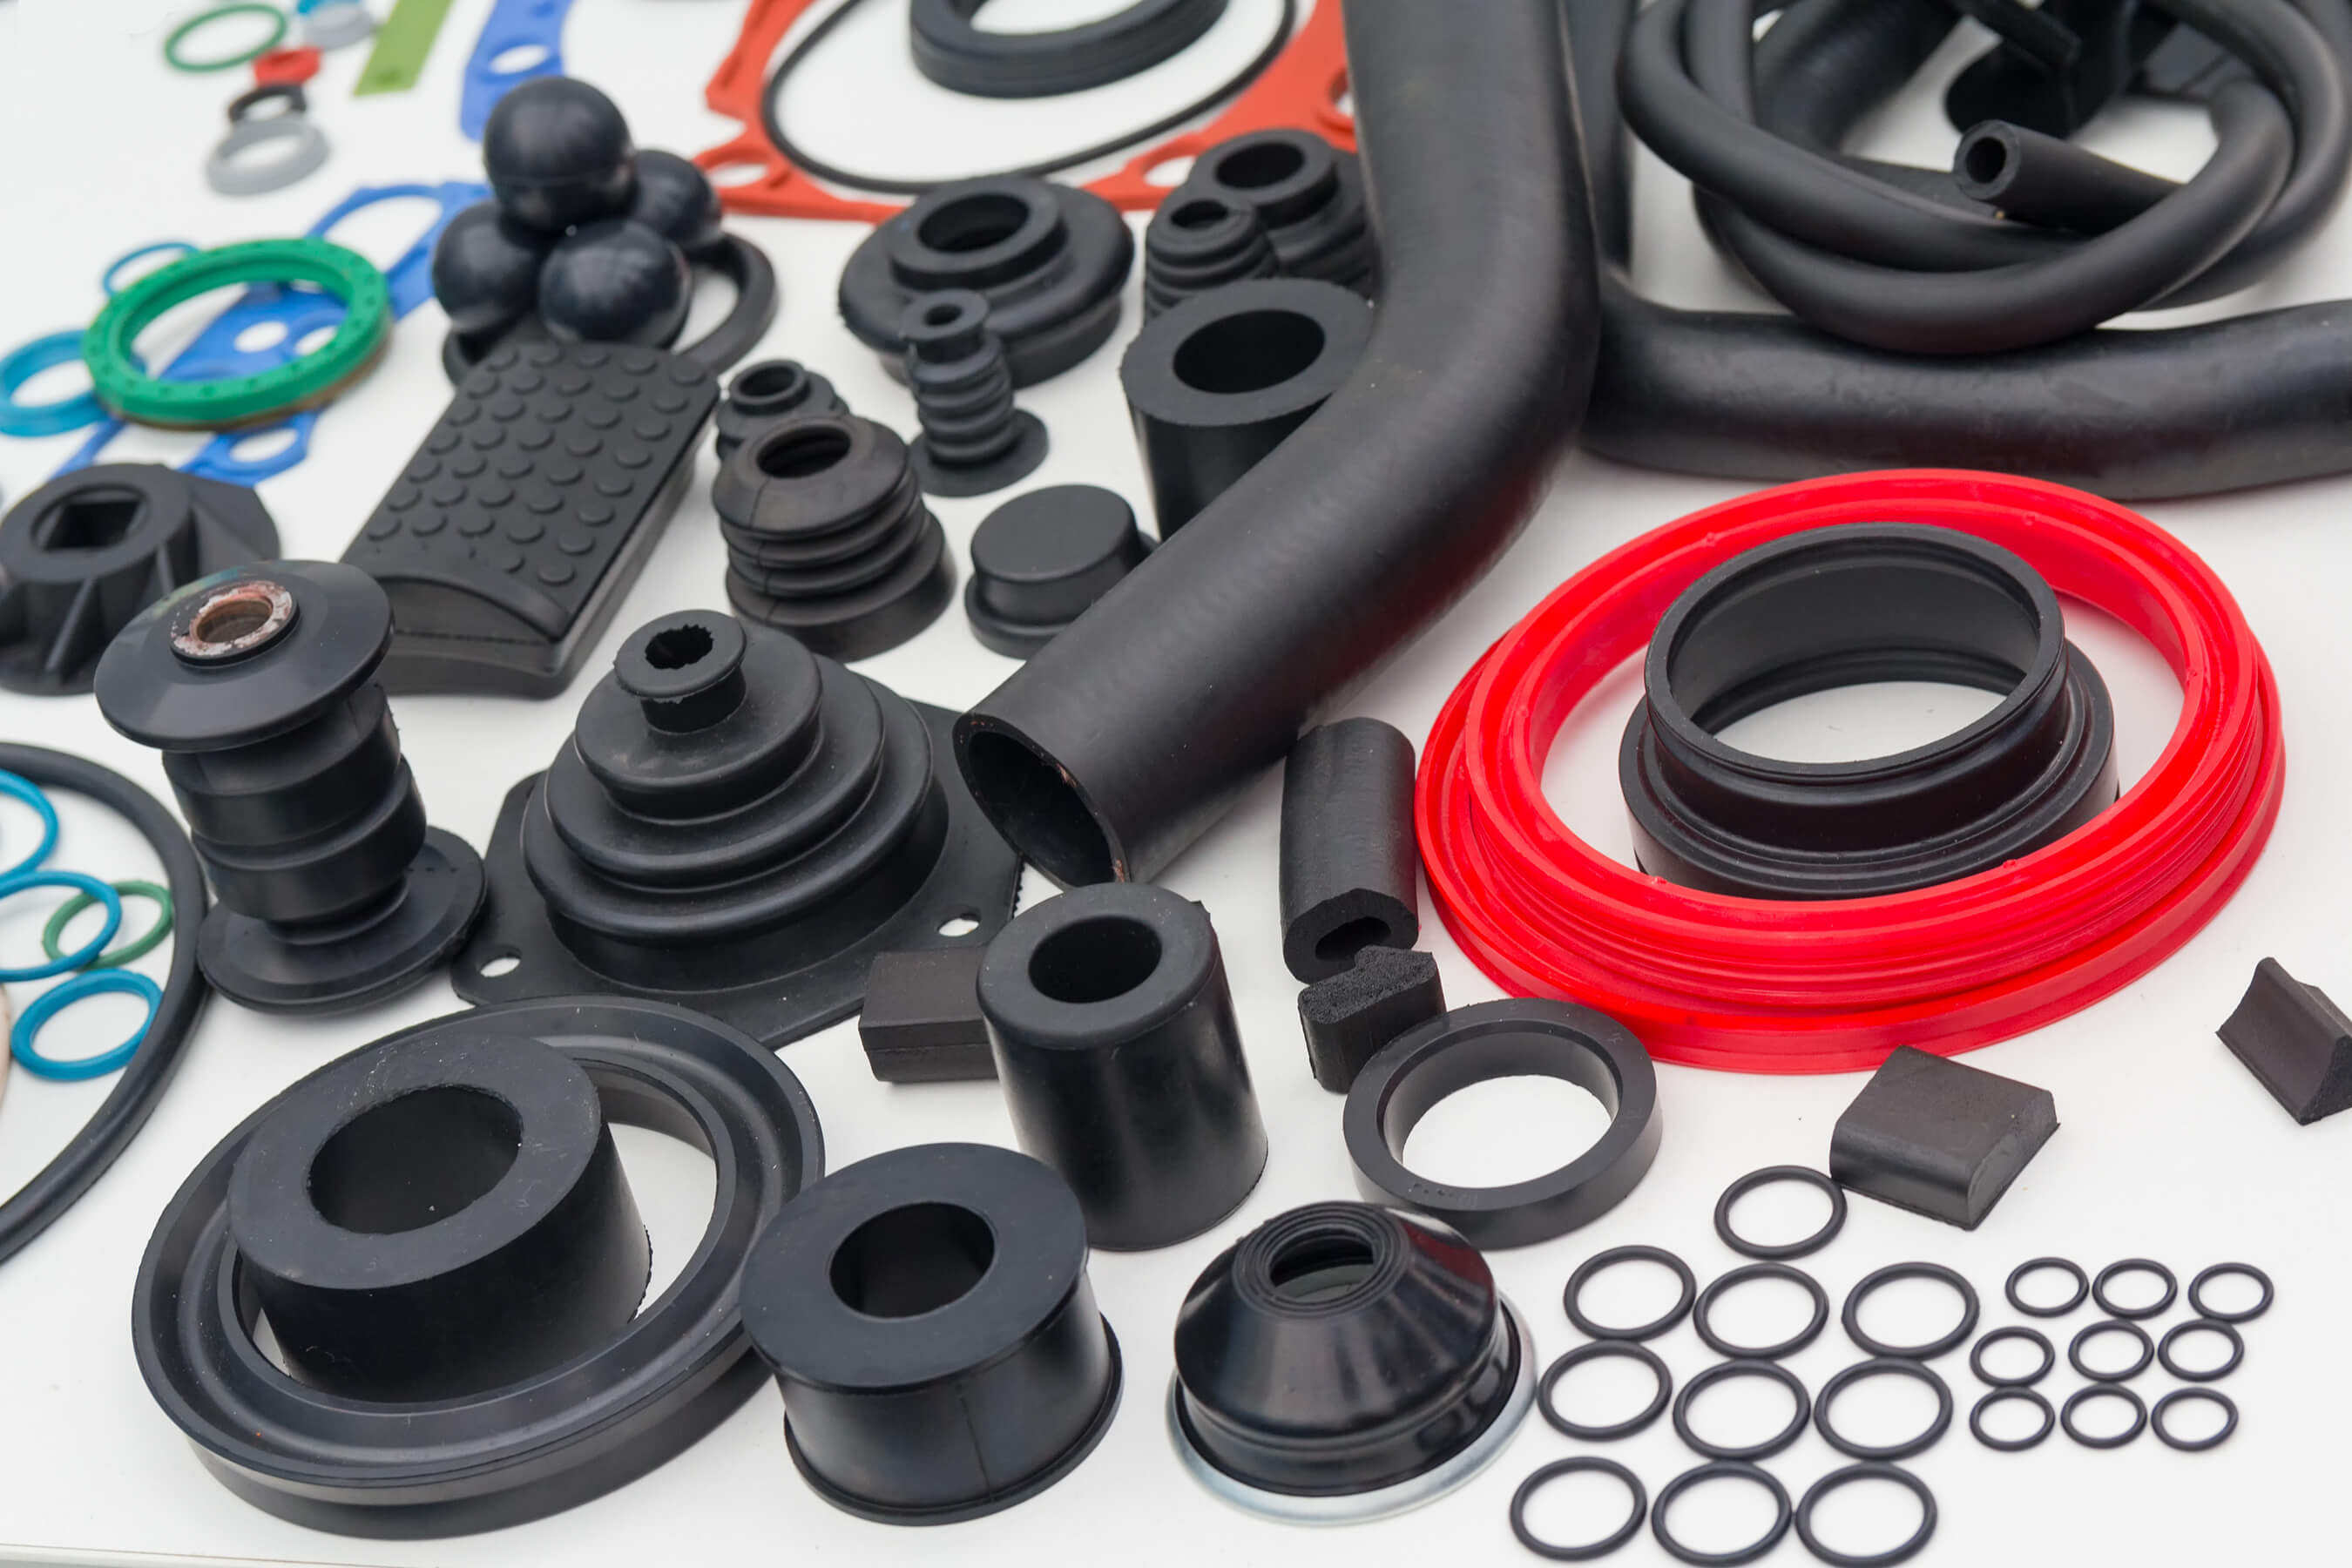 https://www.rpmrubberparts.com/hubfs/engineers-guide-rubber-molded-parts-types%20(1).jpeg